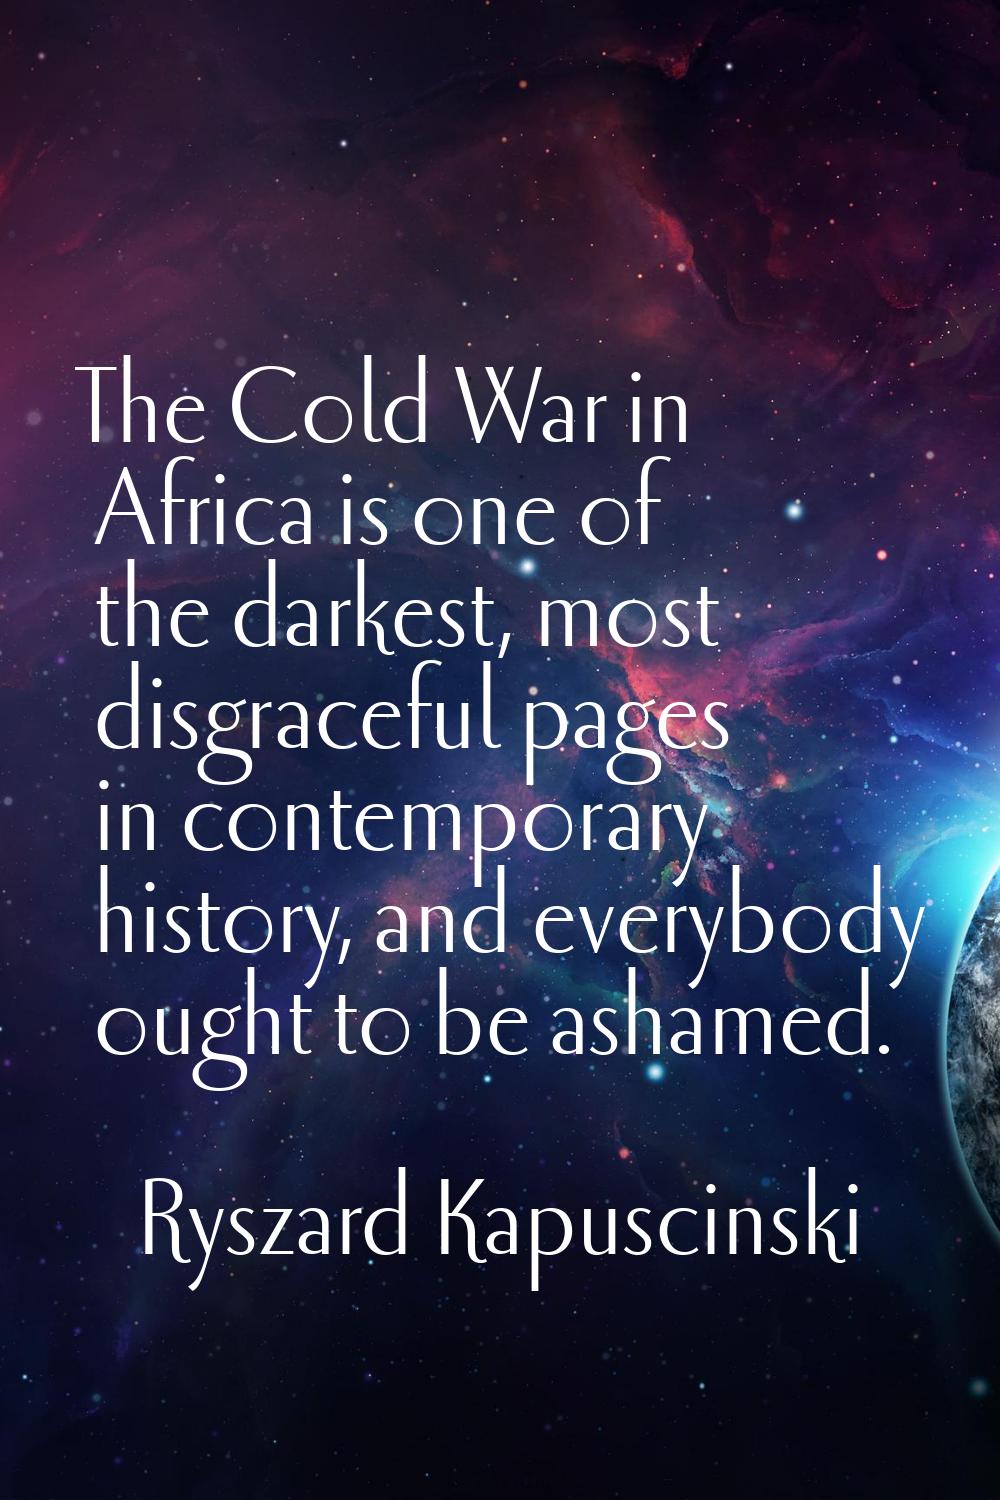 The Cold War in Africa is one of the darkest, most disgraceful pages in contemporary history, and e